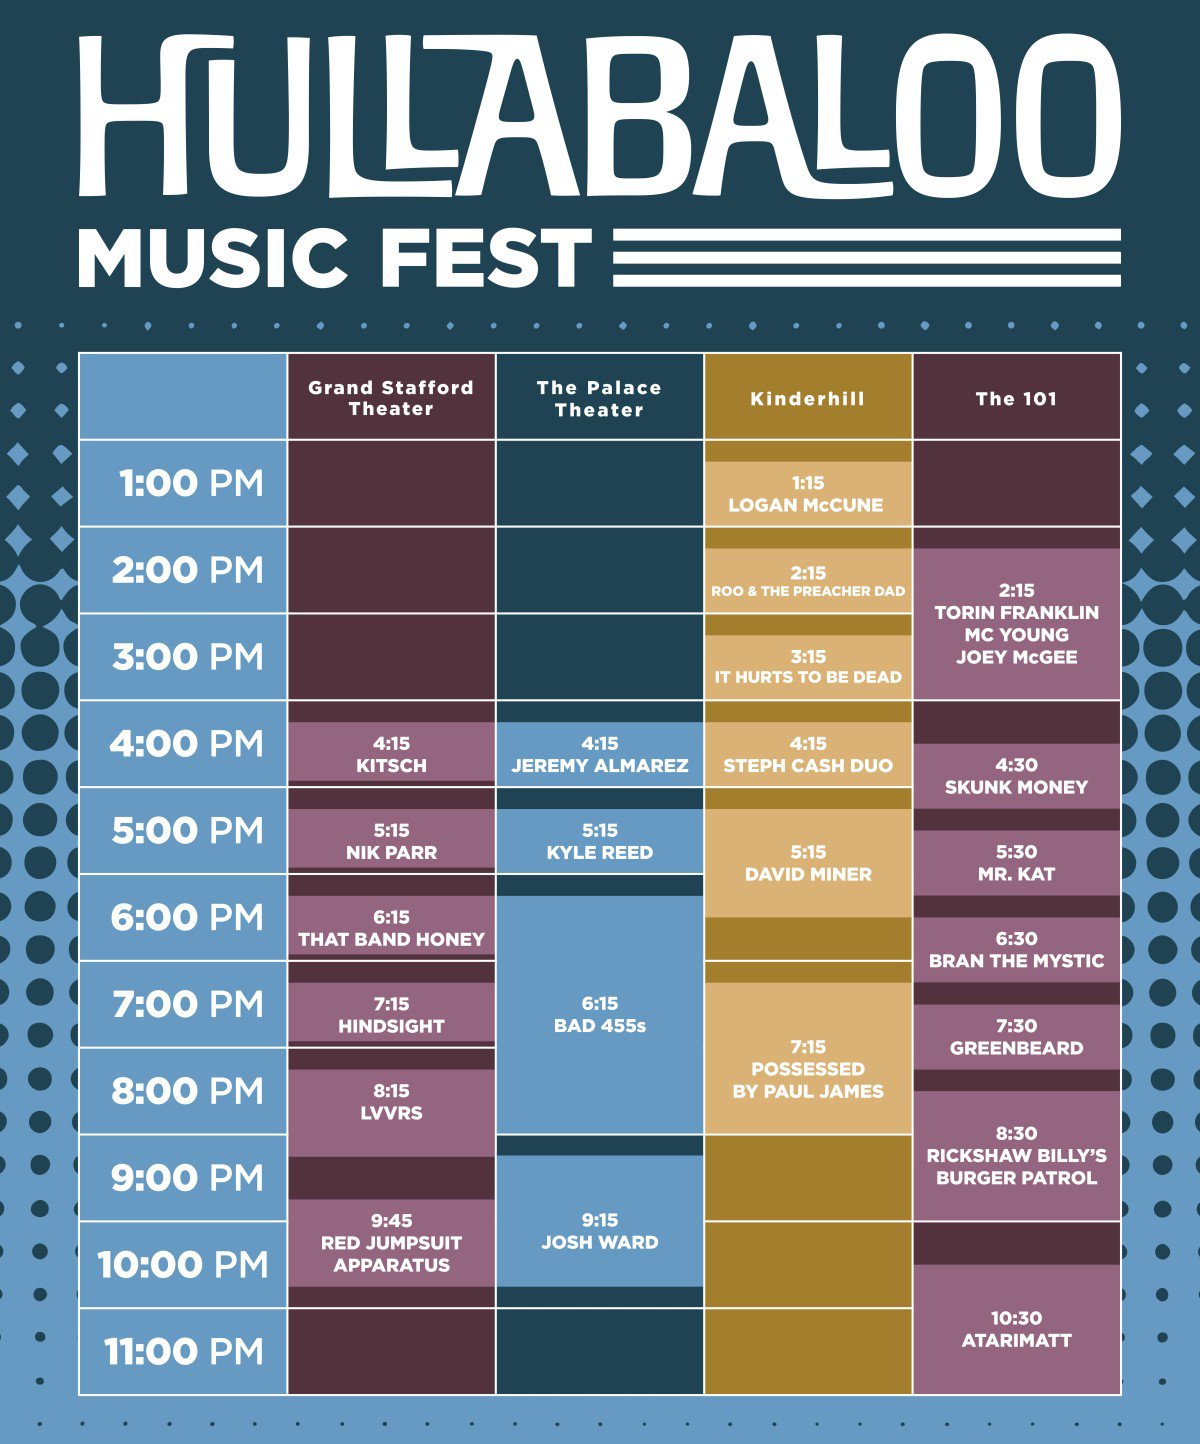 Hullabaloo Music Festival returns with wide variety of musicians